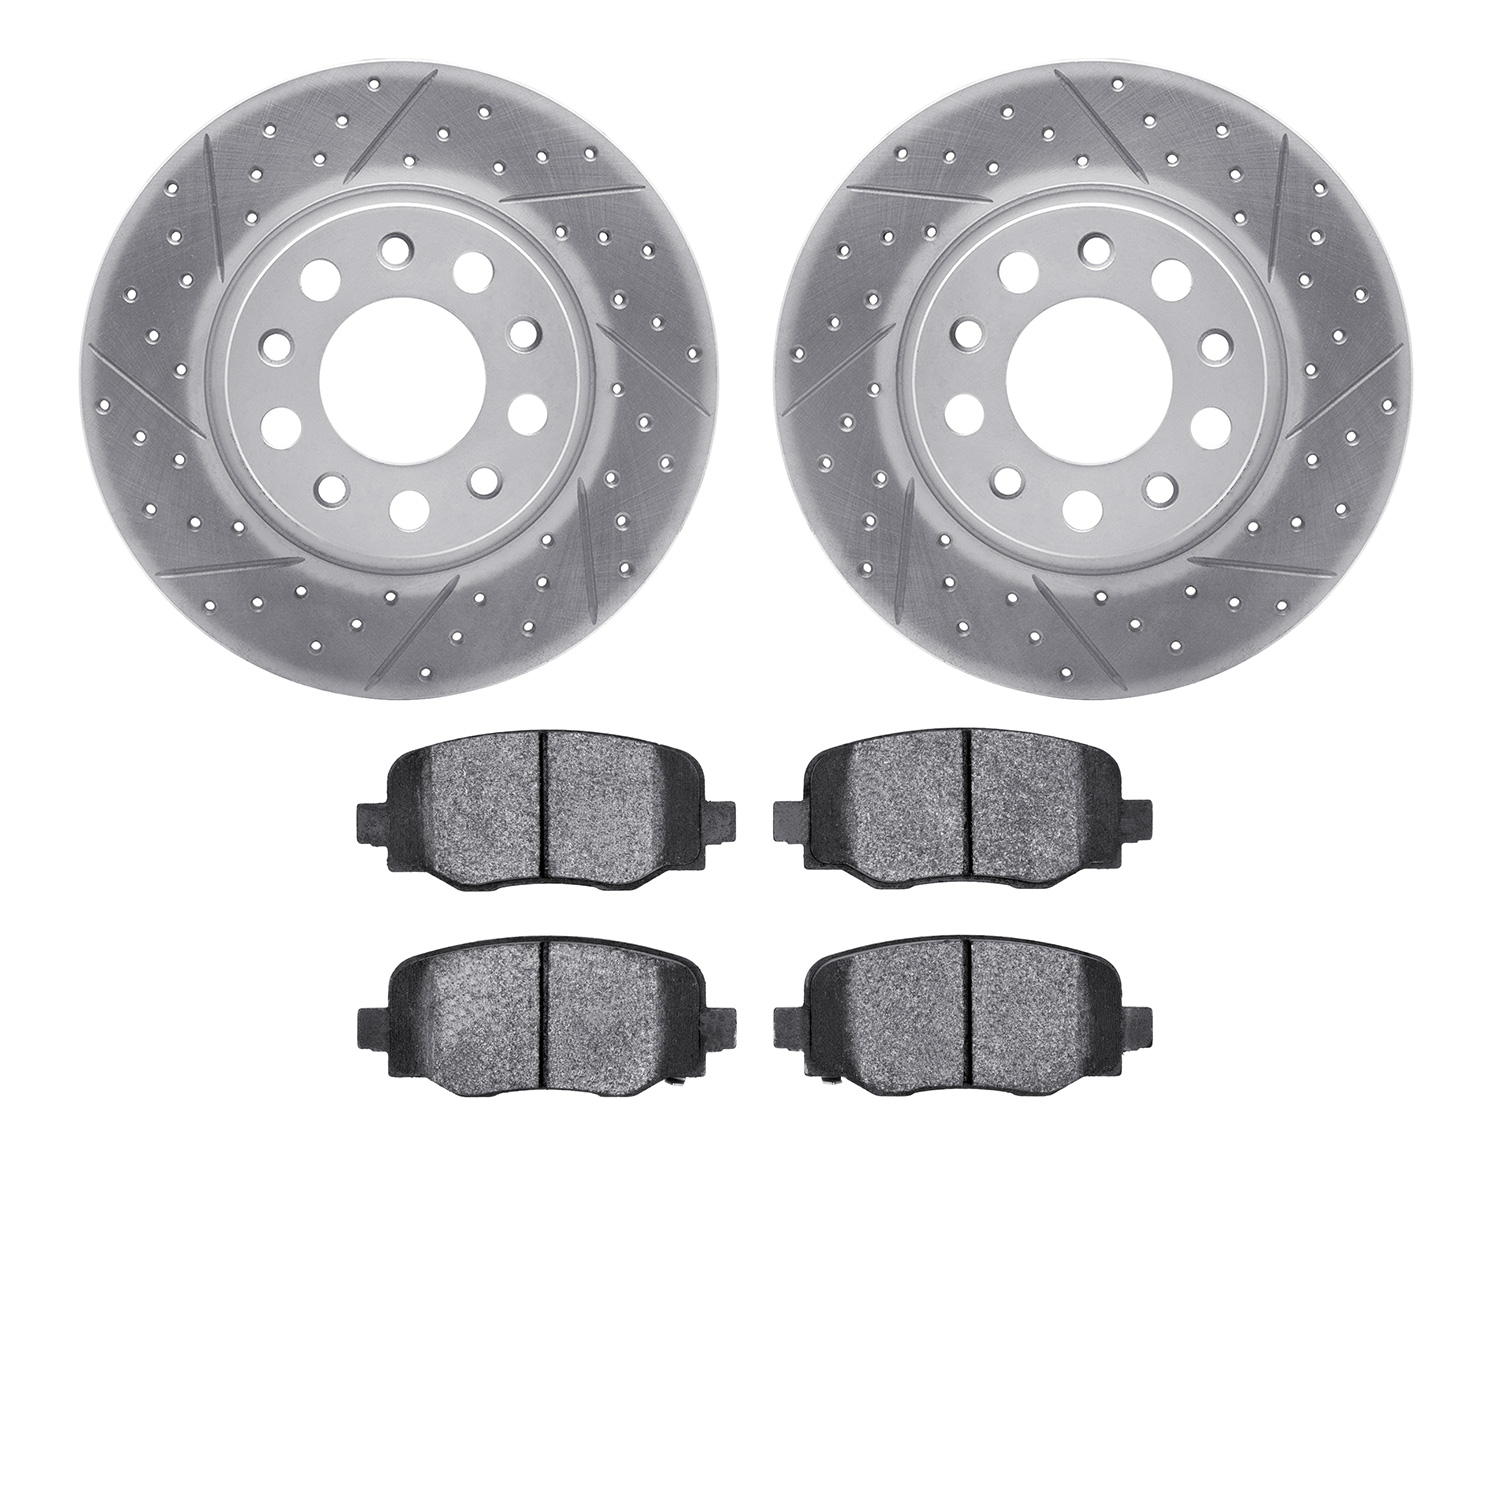 2502-42046 Geoperformance Drilled/Slotted Rotors w/5000 Advanced Brake Pads Kit, Fits Select Mopar, Position: Rear